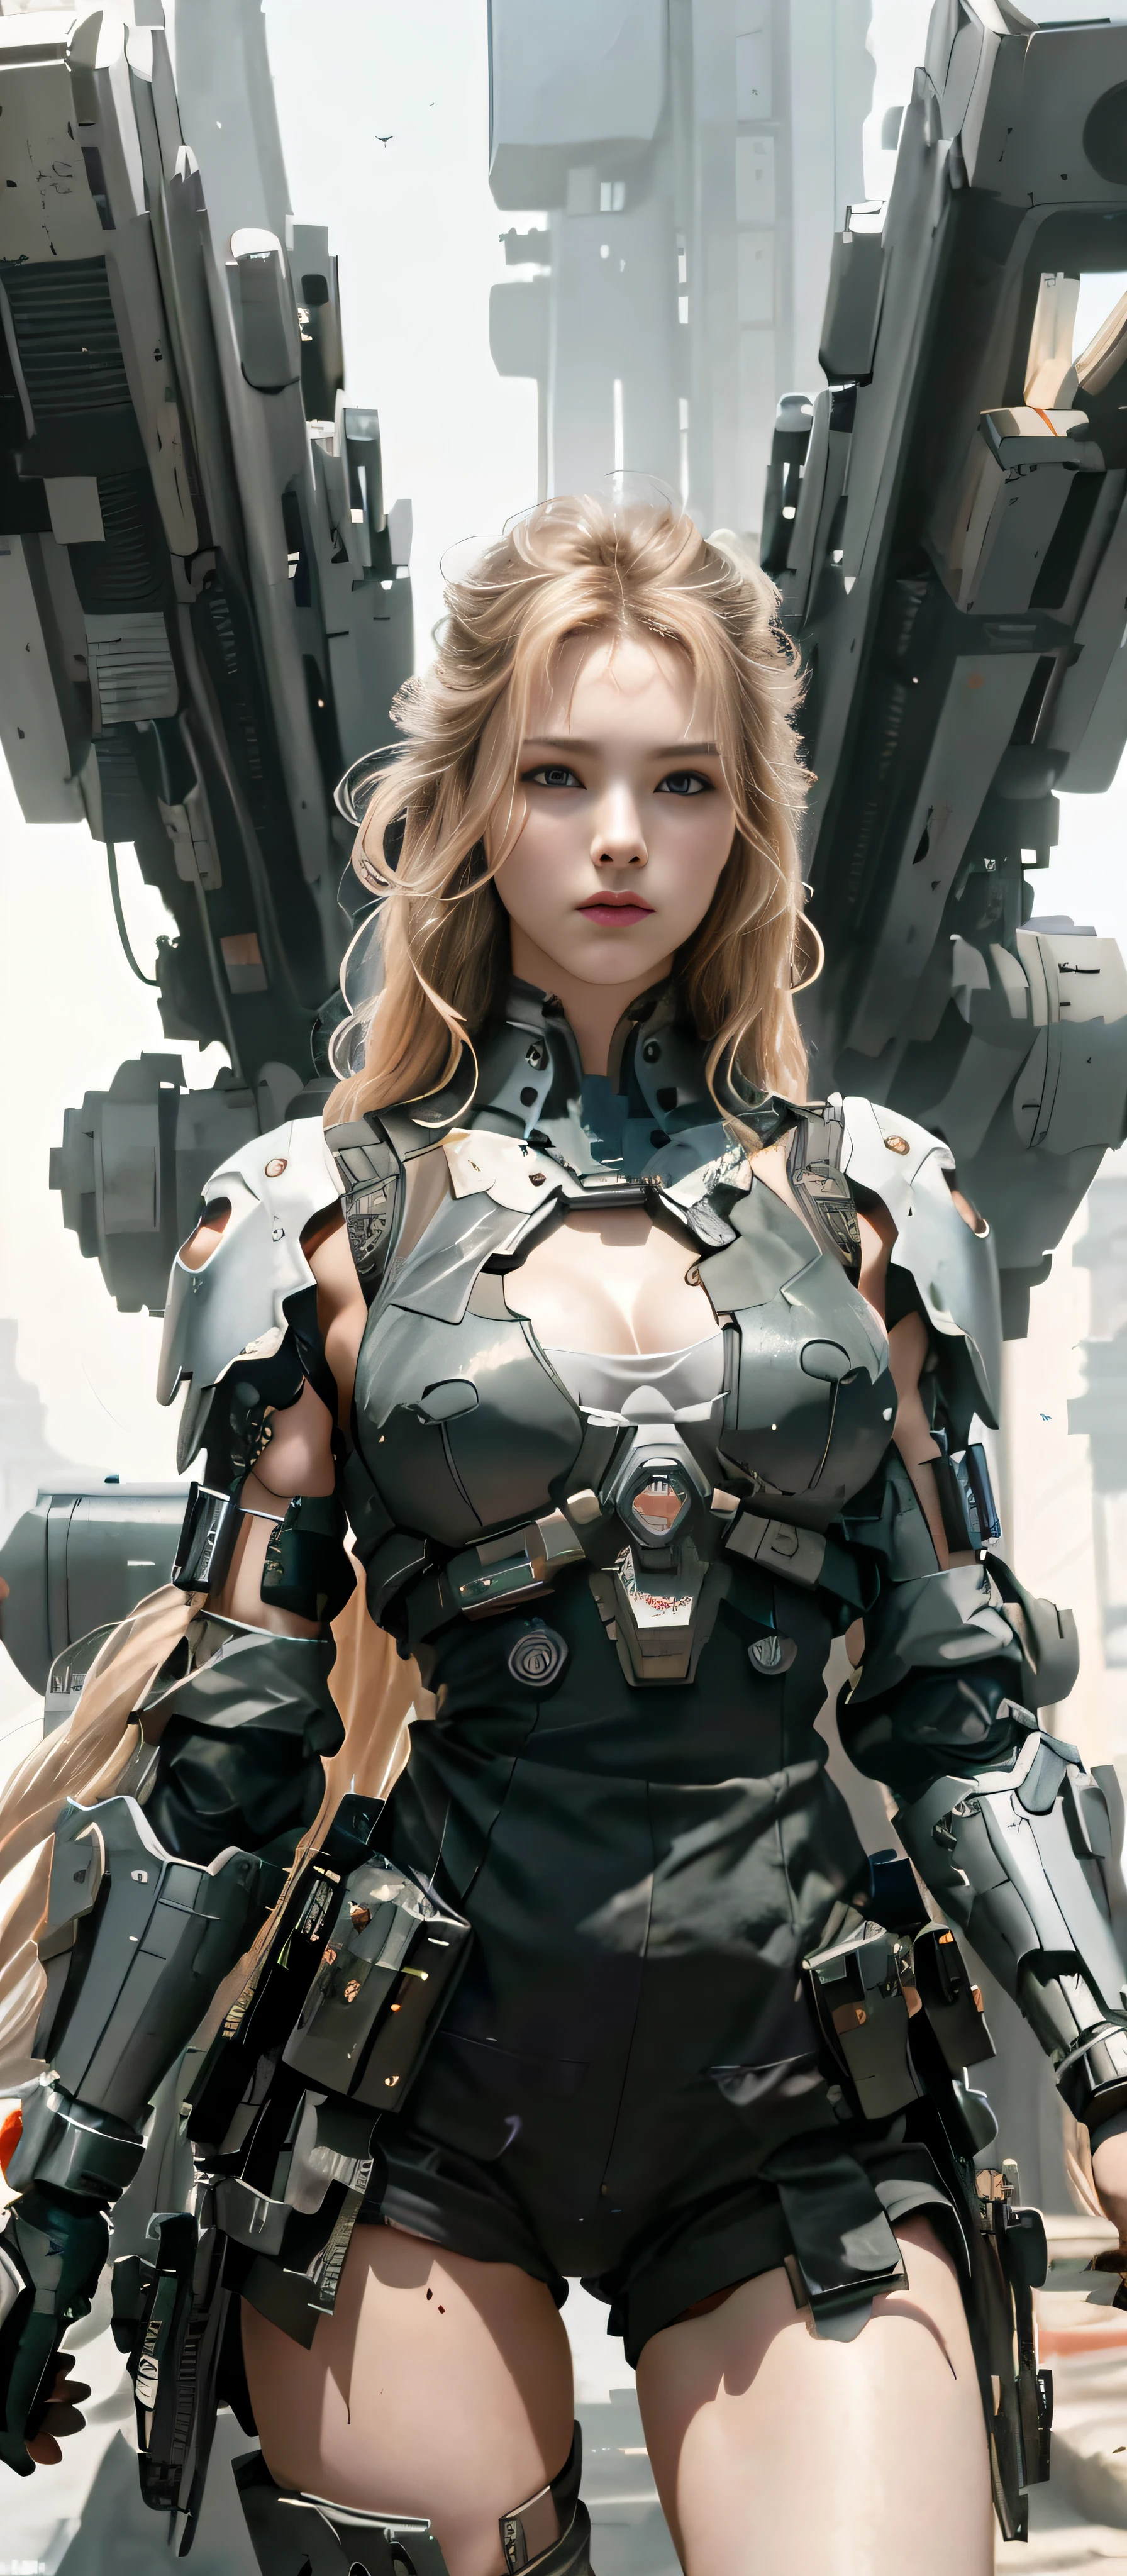 NSFW, Masterpiece, Best Quality, Cinema, Official Art, Propaganda Art, Cinema Wallpaper, Very Detailed CG Unified 4k Wallpaper, Intricate Details, White Background, Upper Body, Facial Focus, Concept Art, Production Art, ( , highres, (realistic, photo-realistic:1.2), physically-based rendering, machinery, reflection, realistic, cyberpunk, symmetric front view close up head shot eyes symmetry face very sharp focus realistic award winning matte drawing movie light 1 boy, mecha, (Illustration: 1.1), slender, big breasts, fair skin, delicate face, king robe, shine, tights, (long blonde hair), green eyes, battlefield, chip, shine, long sword